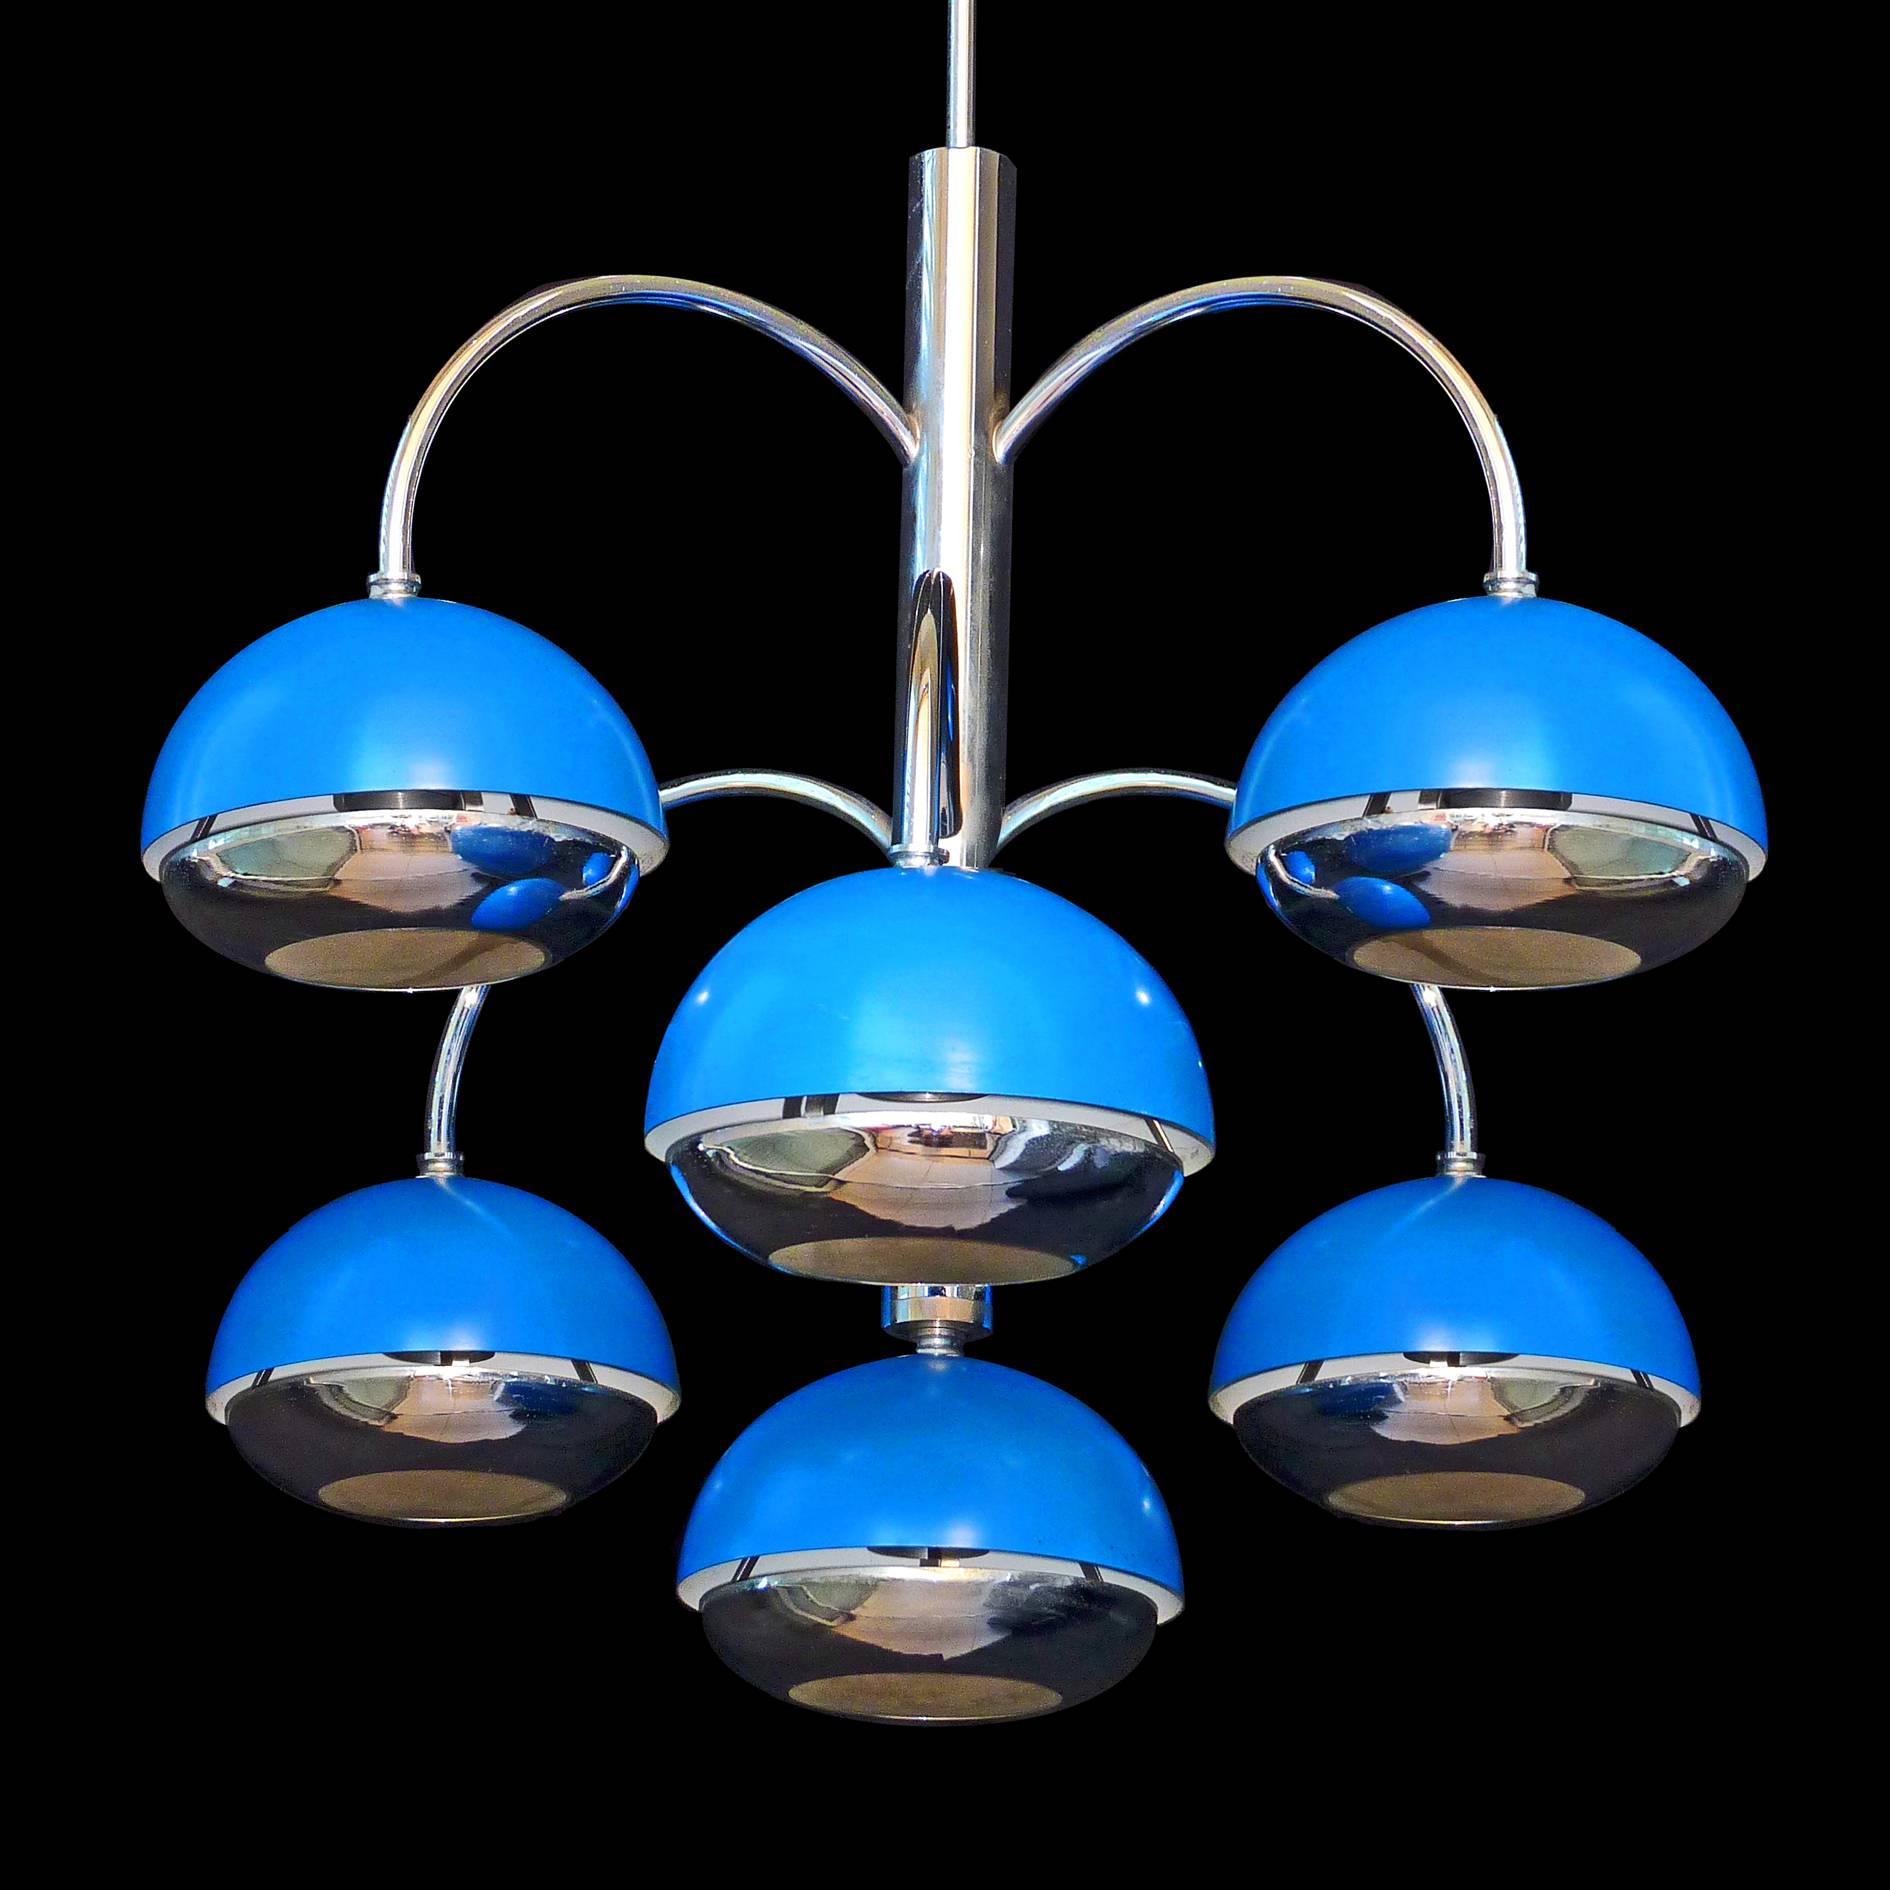 Rare turquoise blue and chrome vintage Mid-Century Italian Modernist chandelier
Materials: Chrome/ painted aluminium
Very good original vintage condition with a small paint loss on one globe.
Seven light bulbs/ good working condition/European